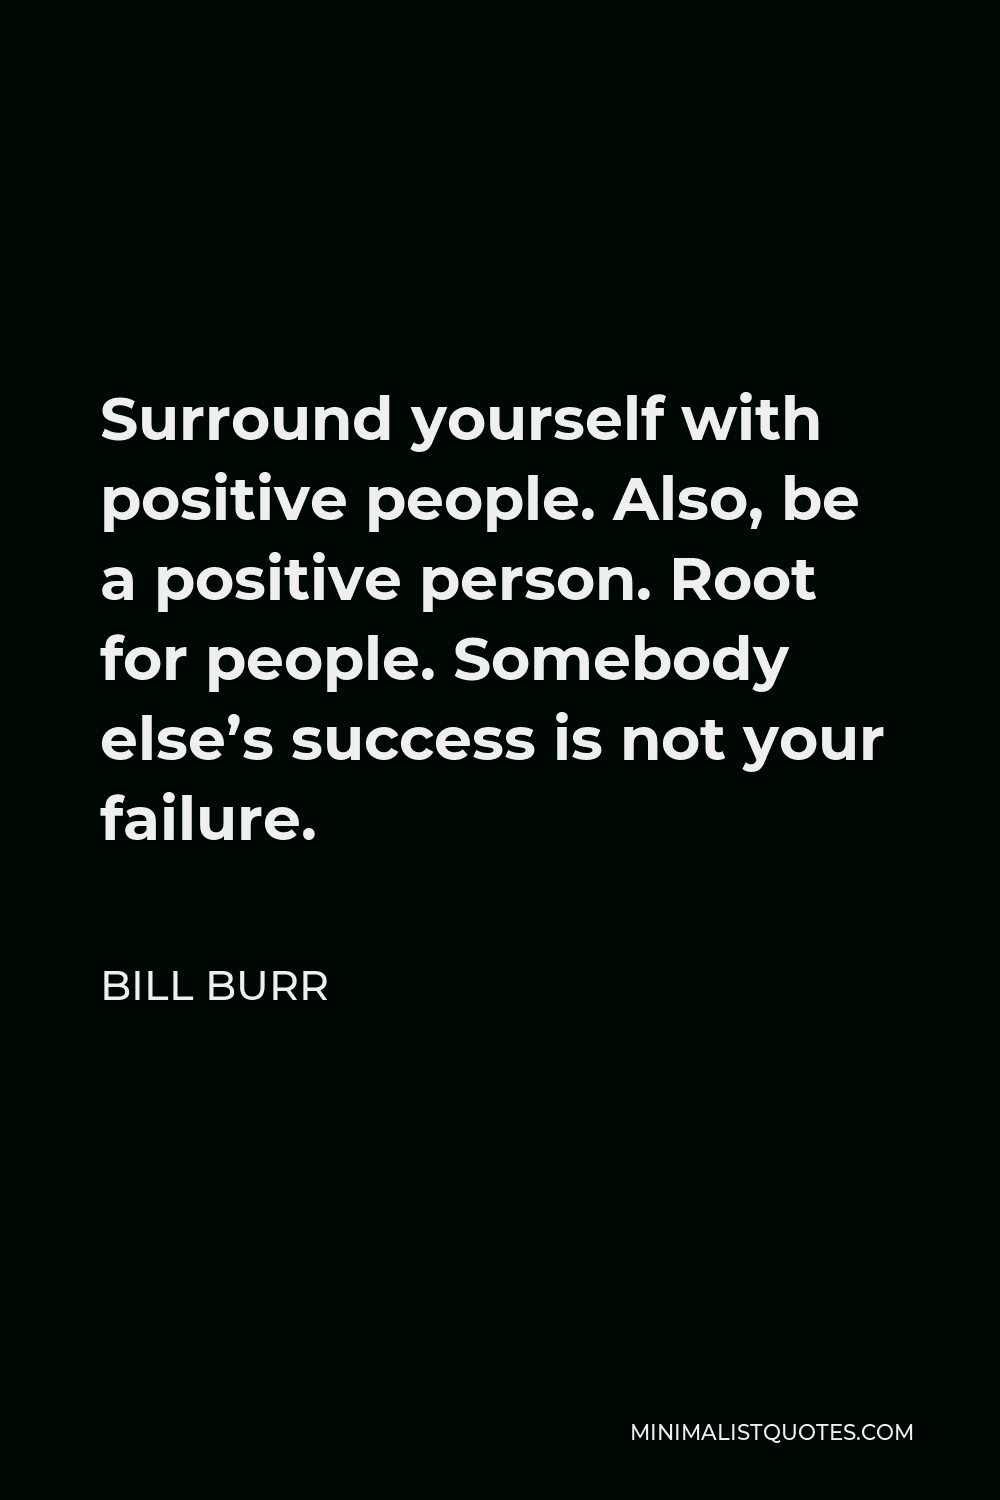 Bill Burr Quote - Surround yourself with positive people. Also, be a positive person. Root for people. Somebody else’s success is not your failure.